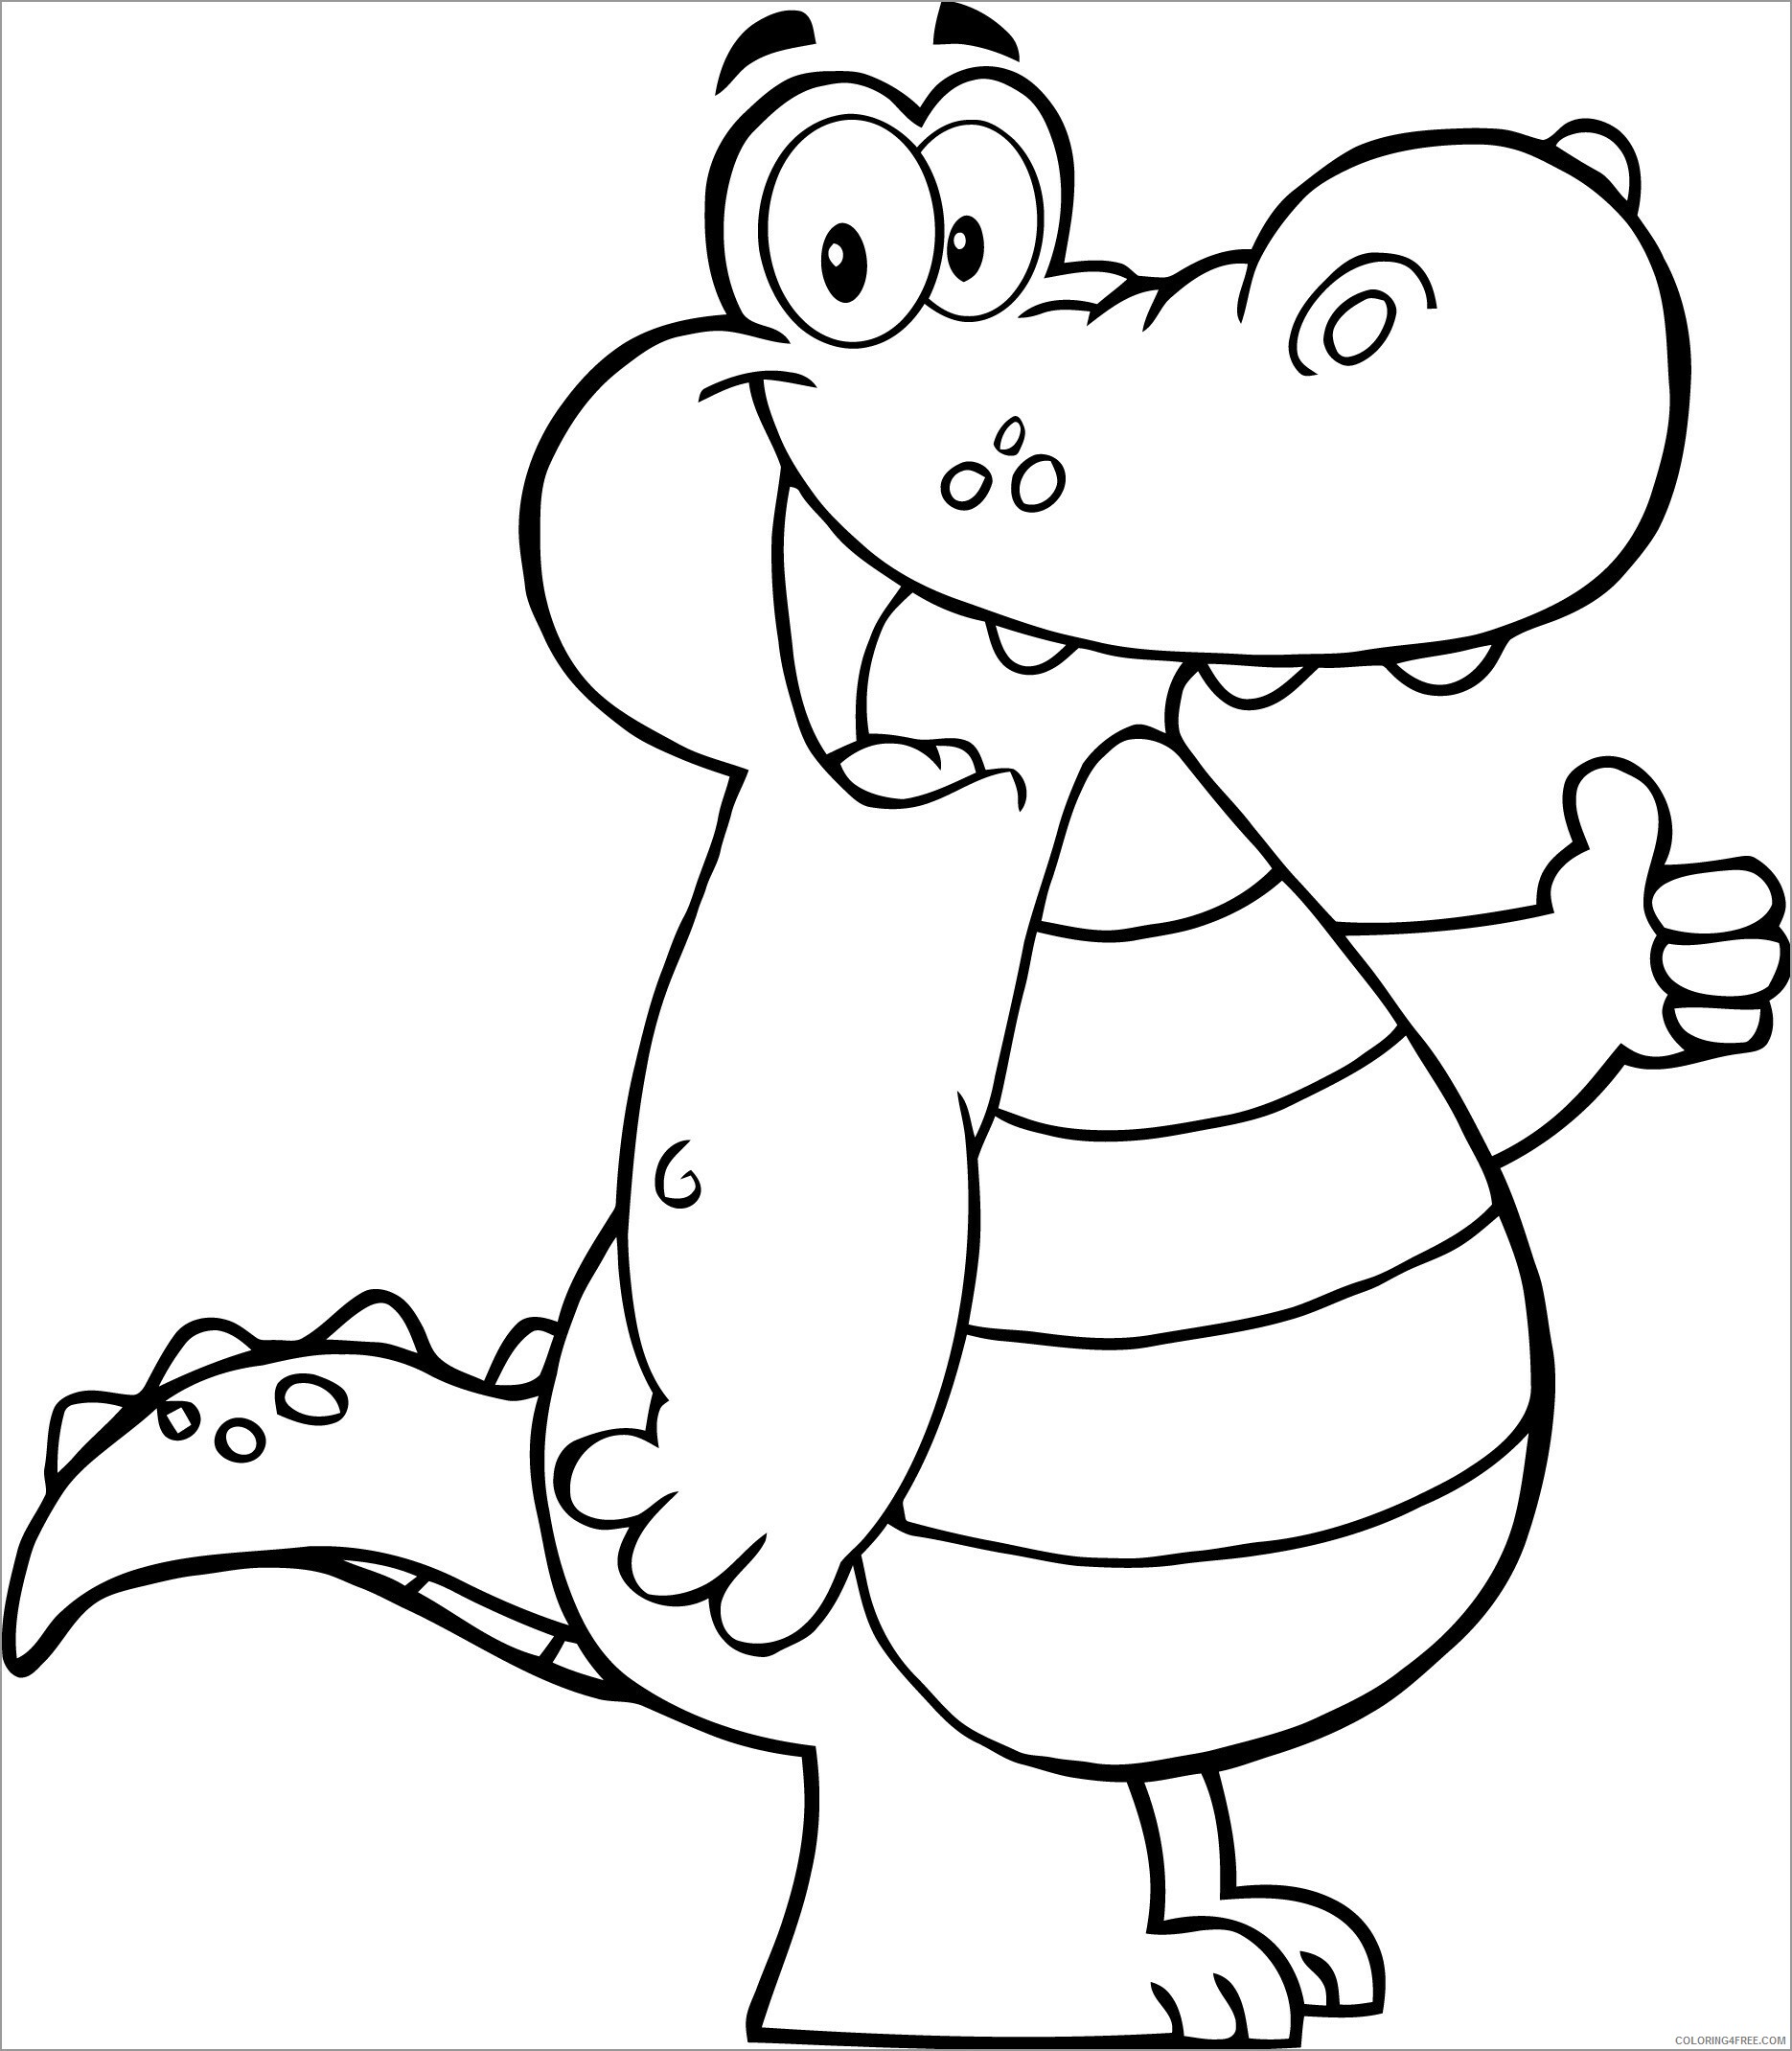 Alligator Coloring Pages Animal Printable Sheets showing thumbs up 2021 0058 Coloring4free